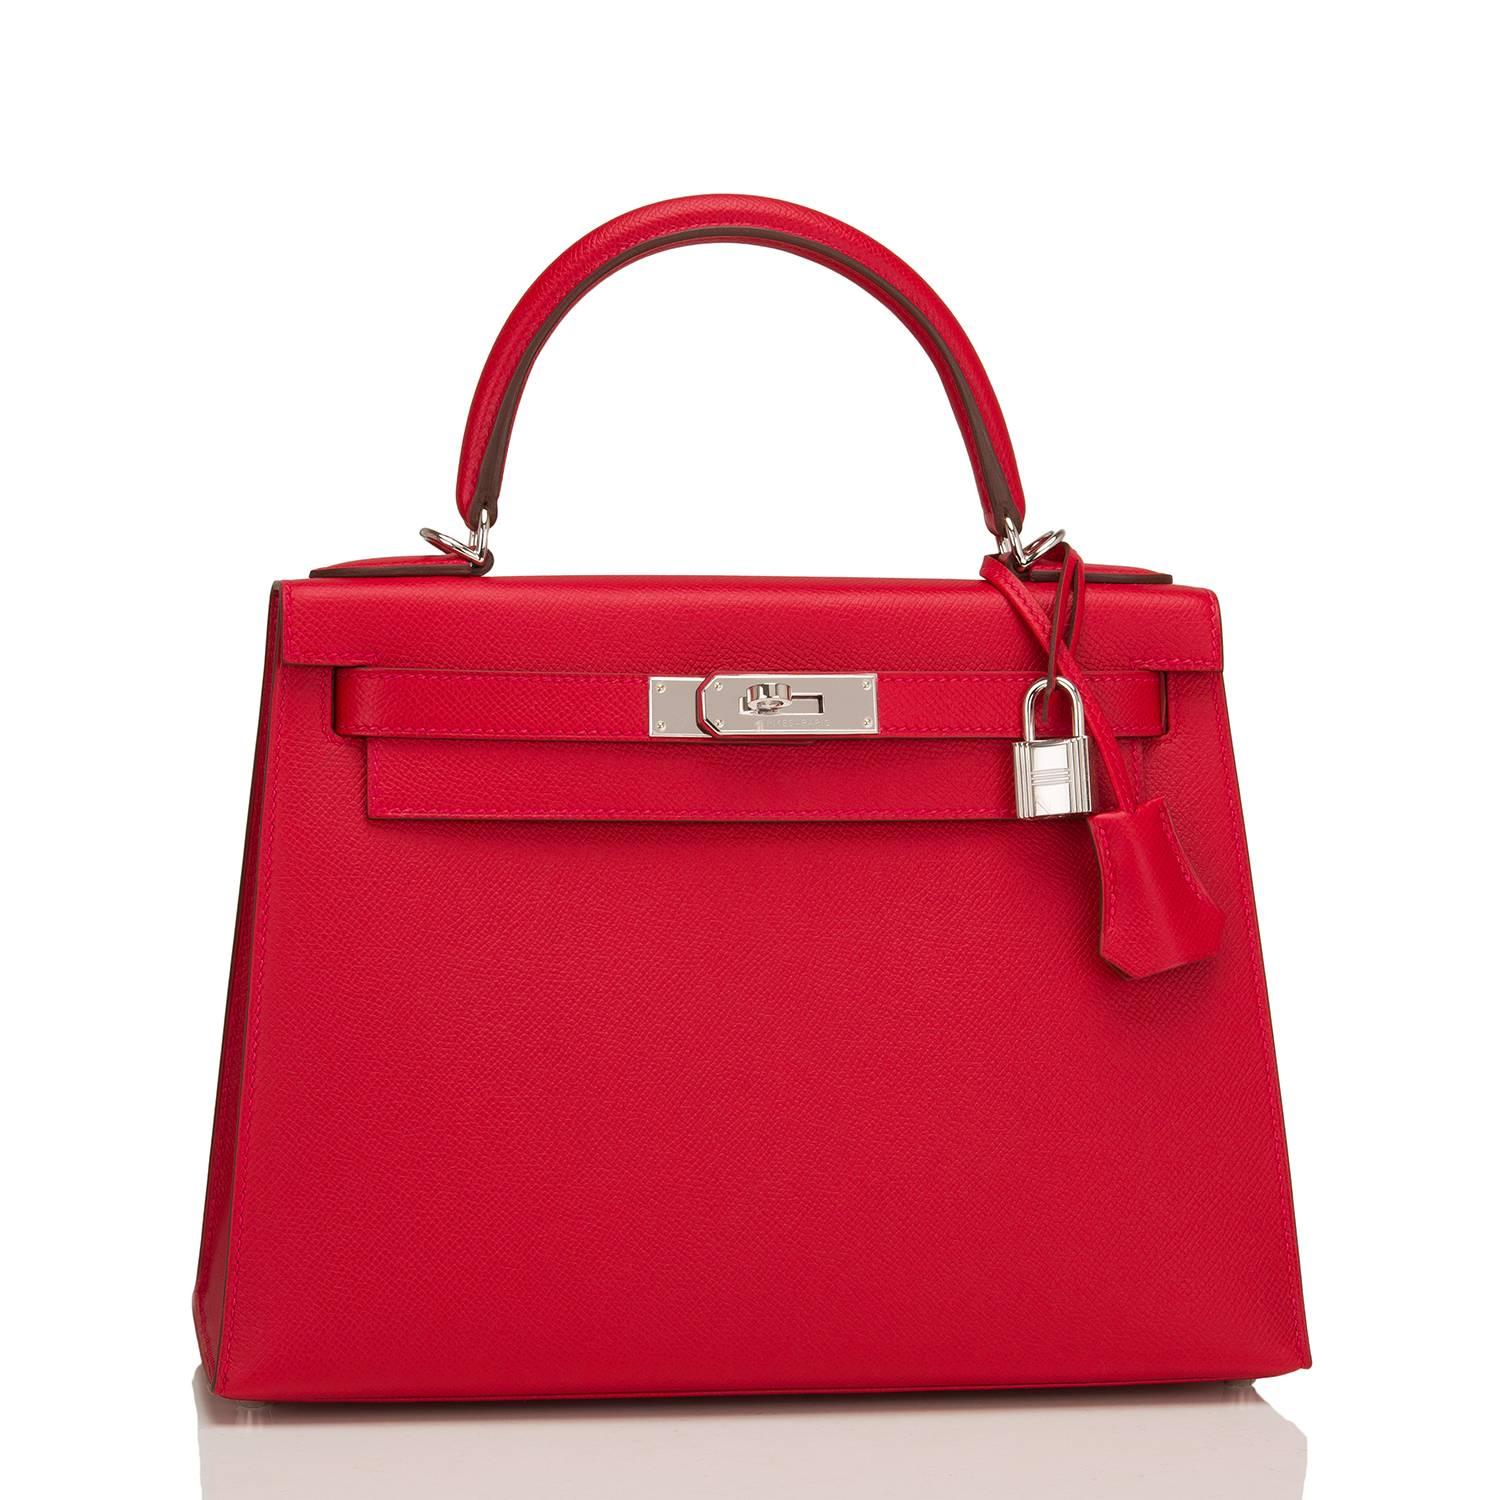 Hermes Rouge Casaque Sellier Kelly 28cm of epsom leather with palladium hardware.

This Kelly Sellier has tonal stitching, a front toggle closure, a clochette with lock and two keys, a single rolled handle and an optional shoulder strap.

The